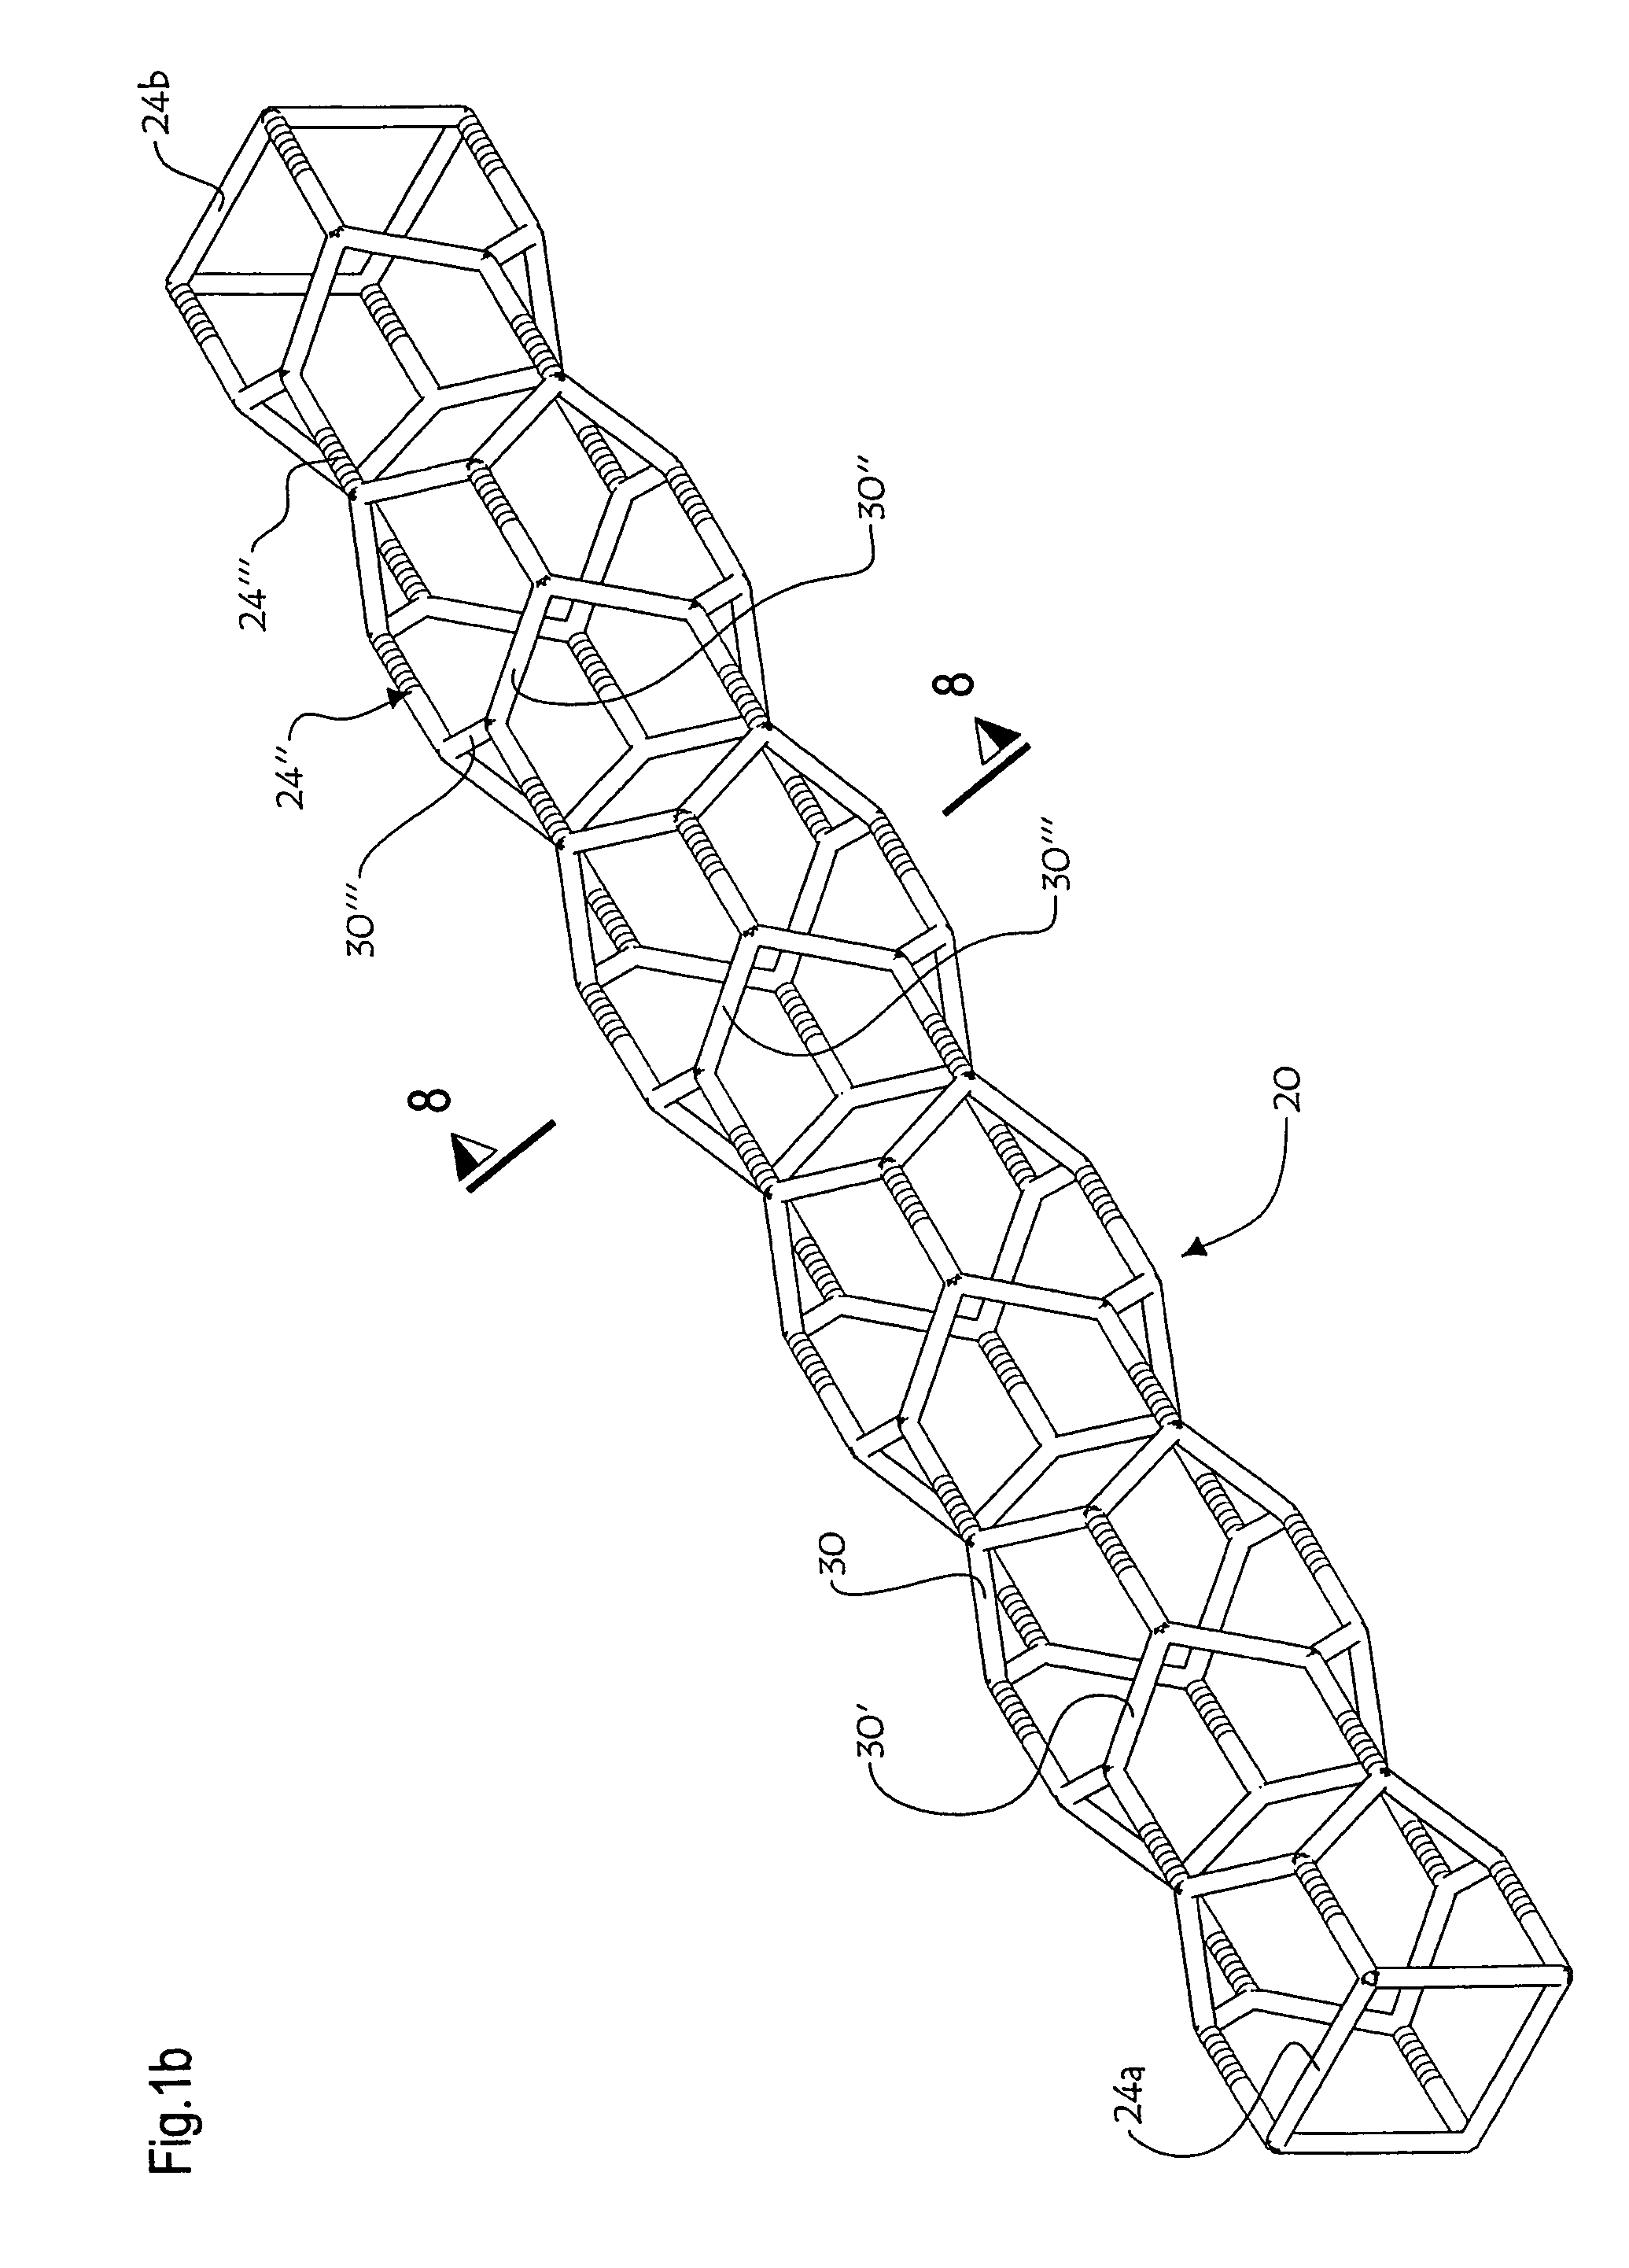 Magnetically induced radial expansion vascular stent